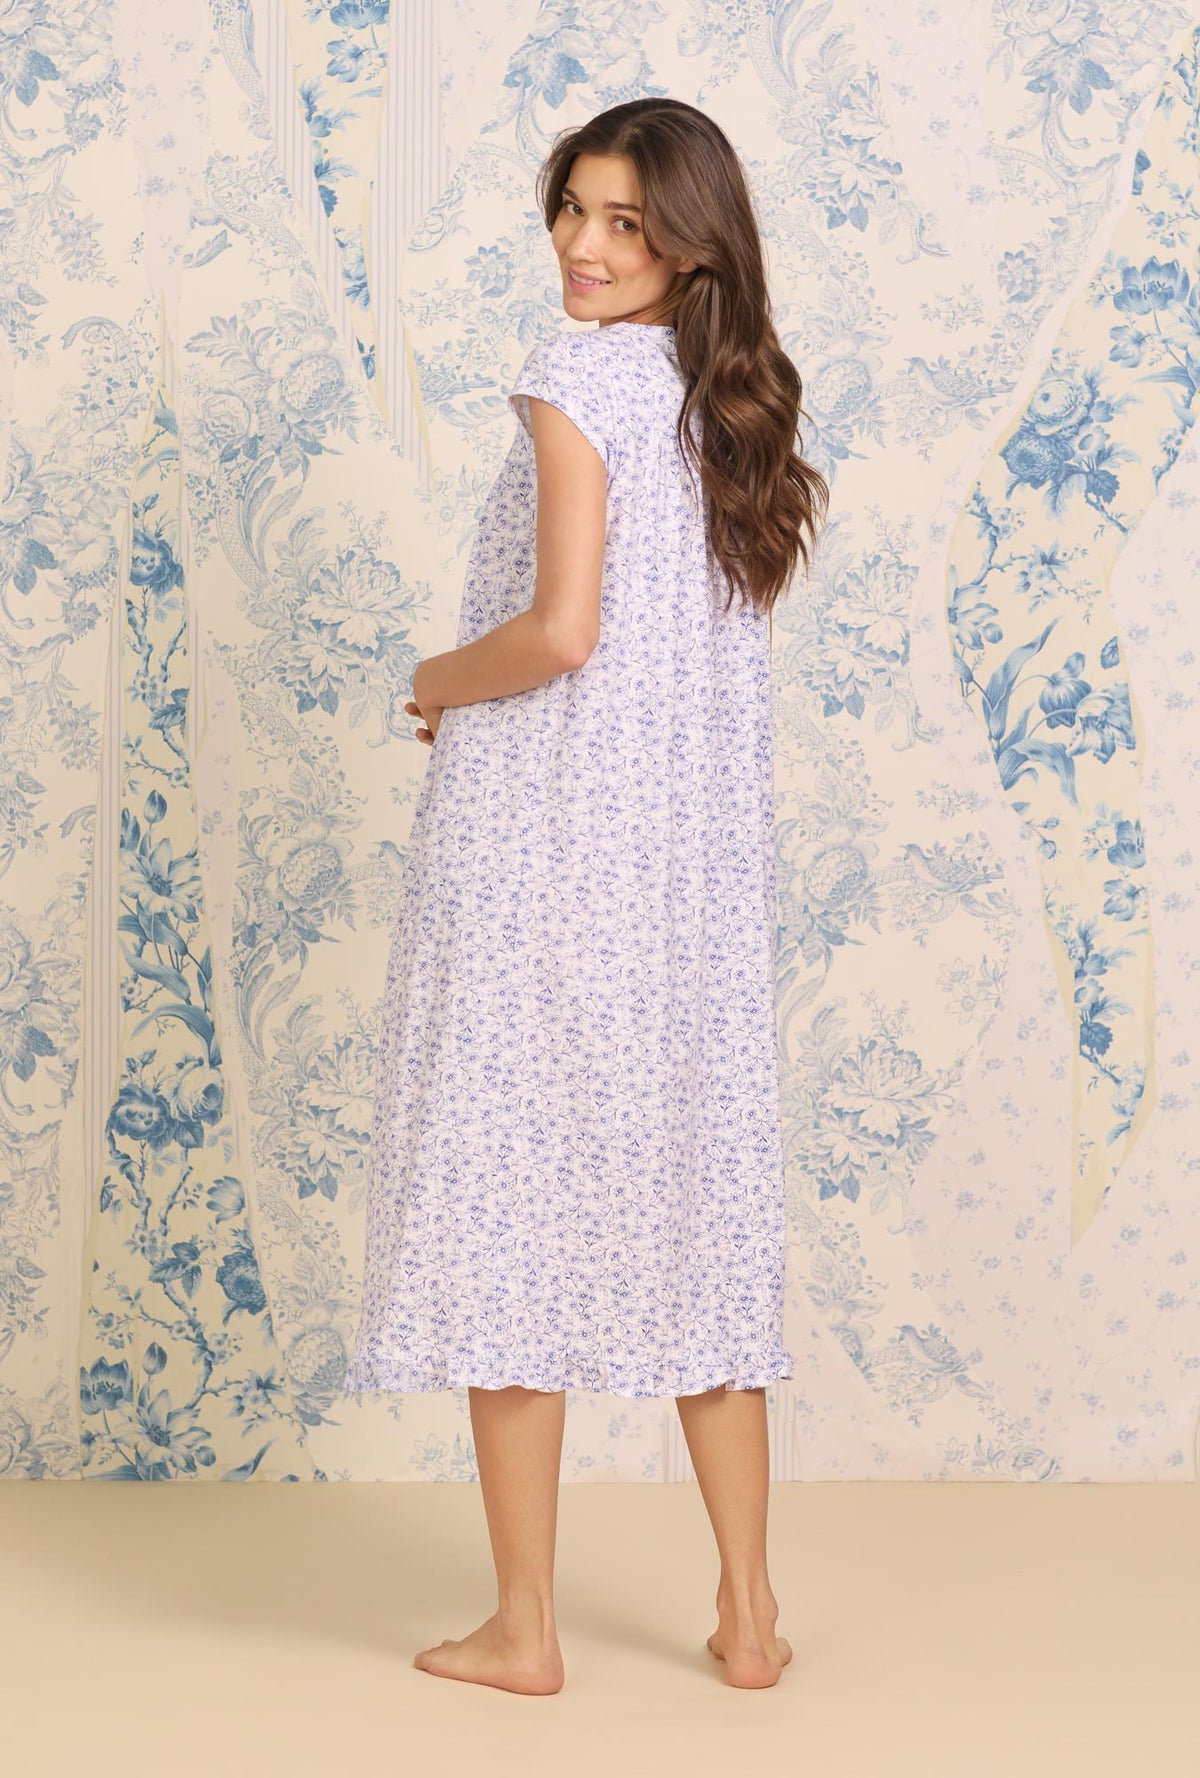 A lady wearing white sleeveless Cotton Knit Long Nightgown with Navy Daisy print